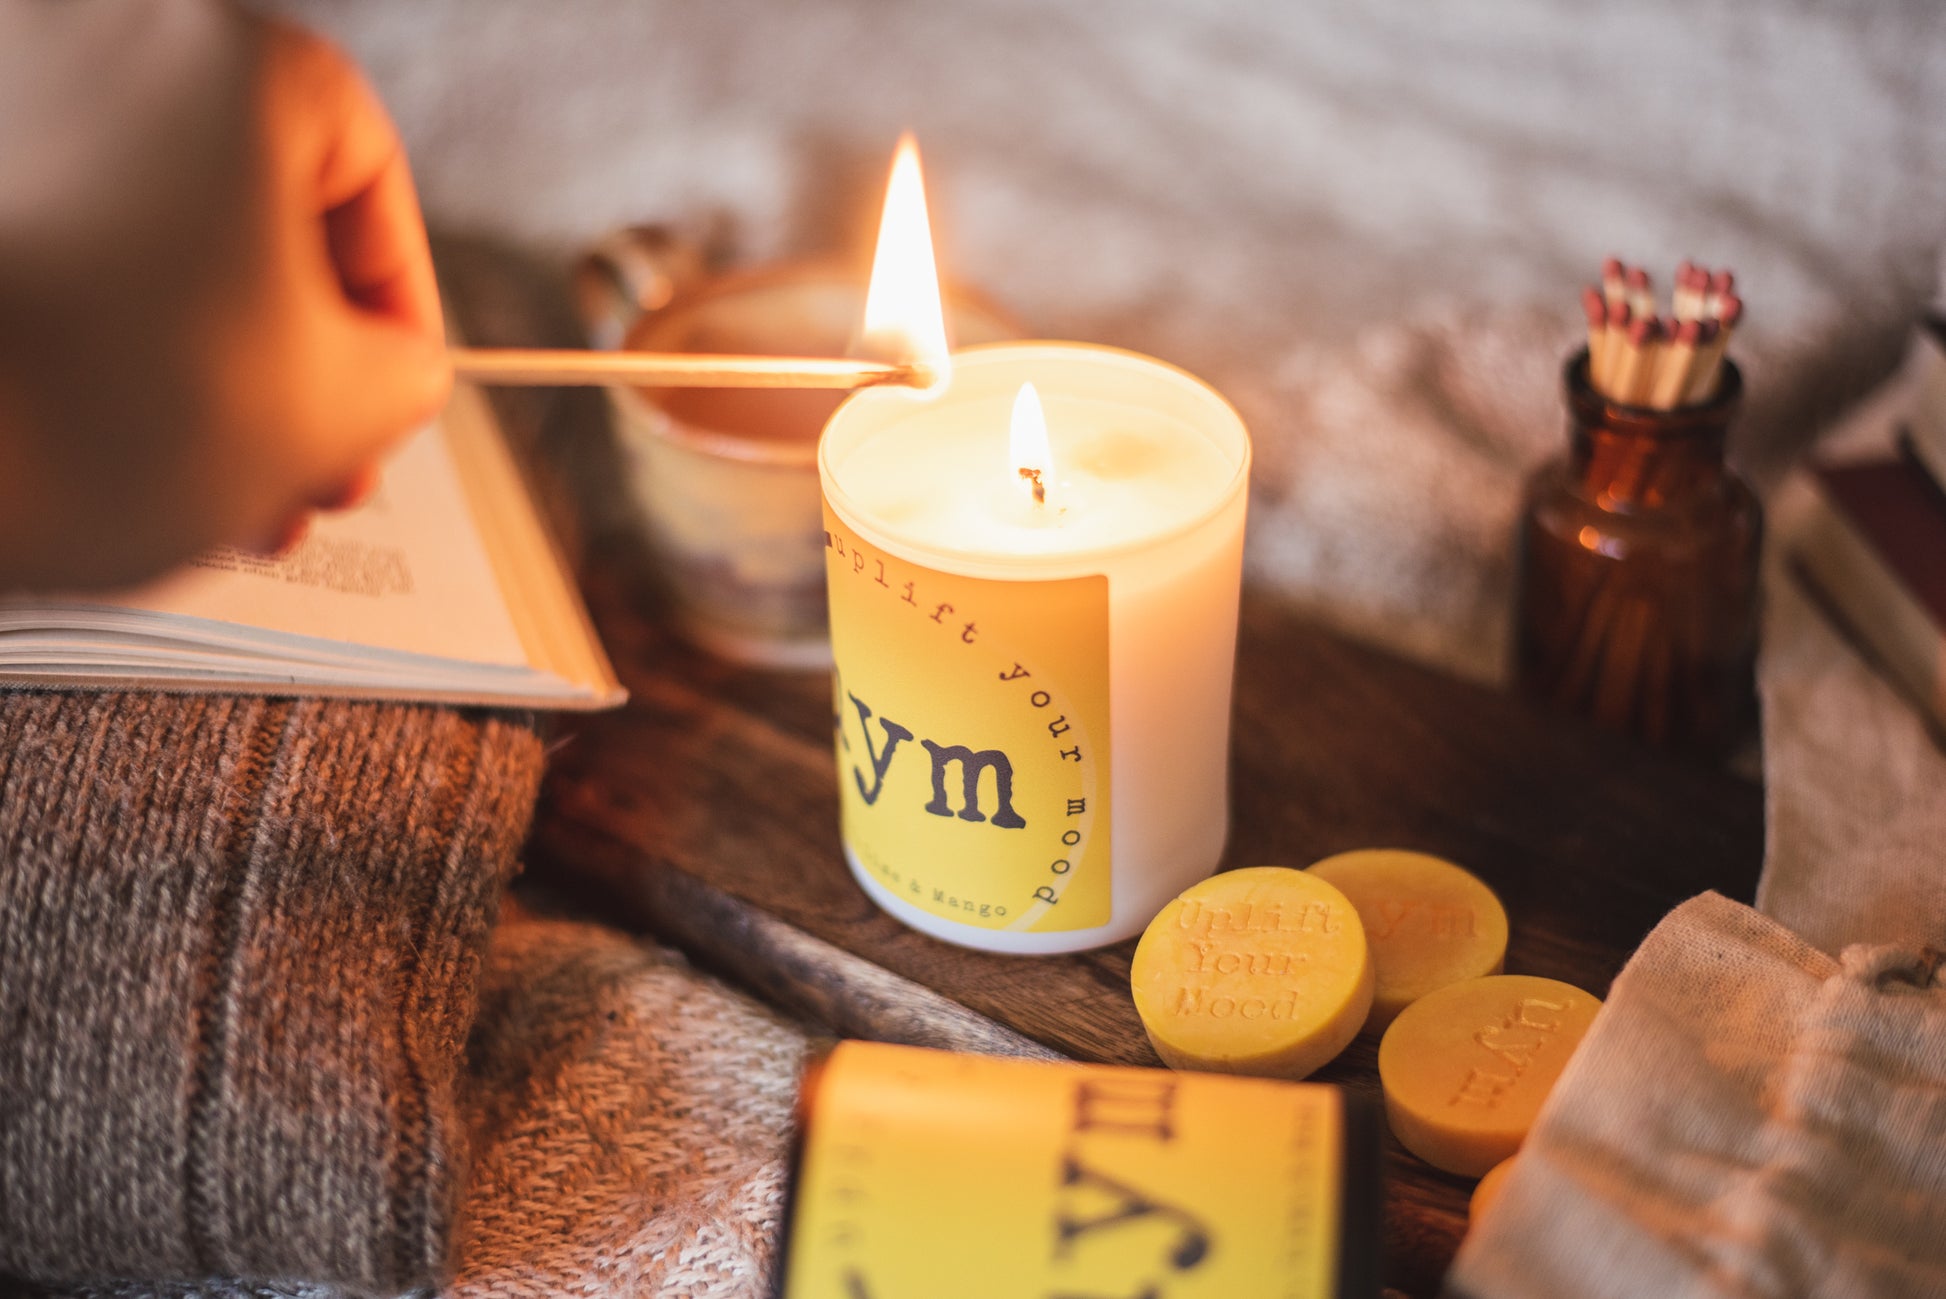 Thai Lime and Mango natural wax candle, matt white glass jar candle lighted, natural wax melts yellow in a cotton bag, apotecary glass with matches,  cosy atmosphere, Uplift Your Mood Scents